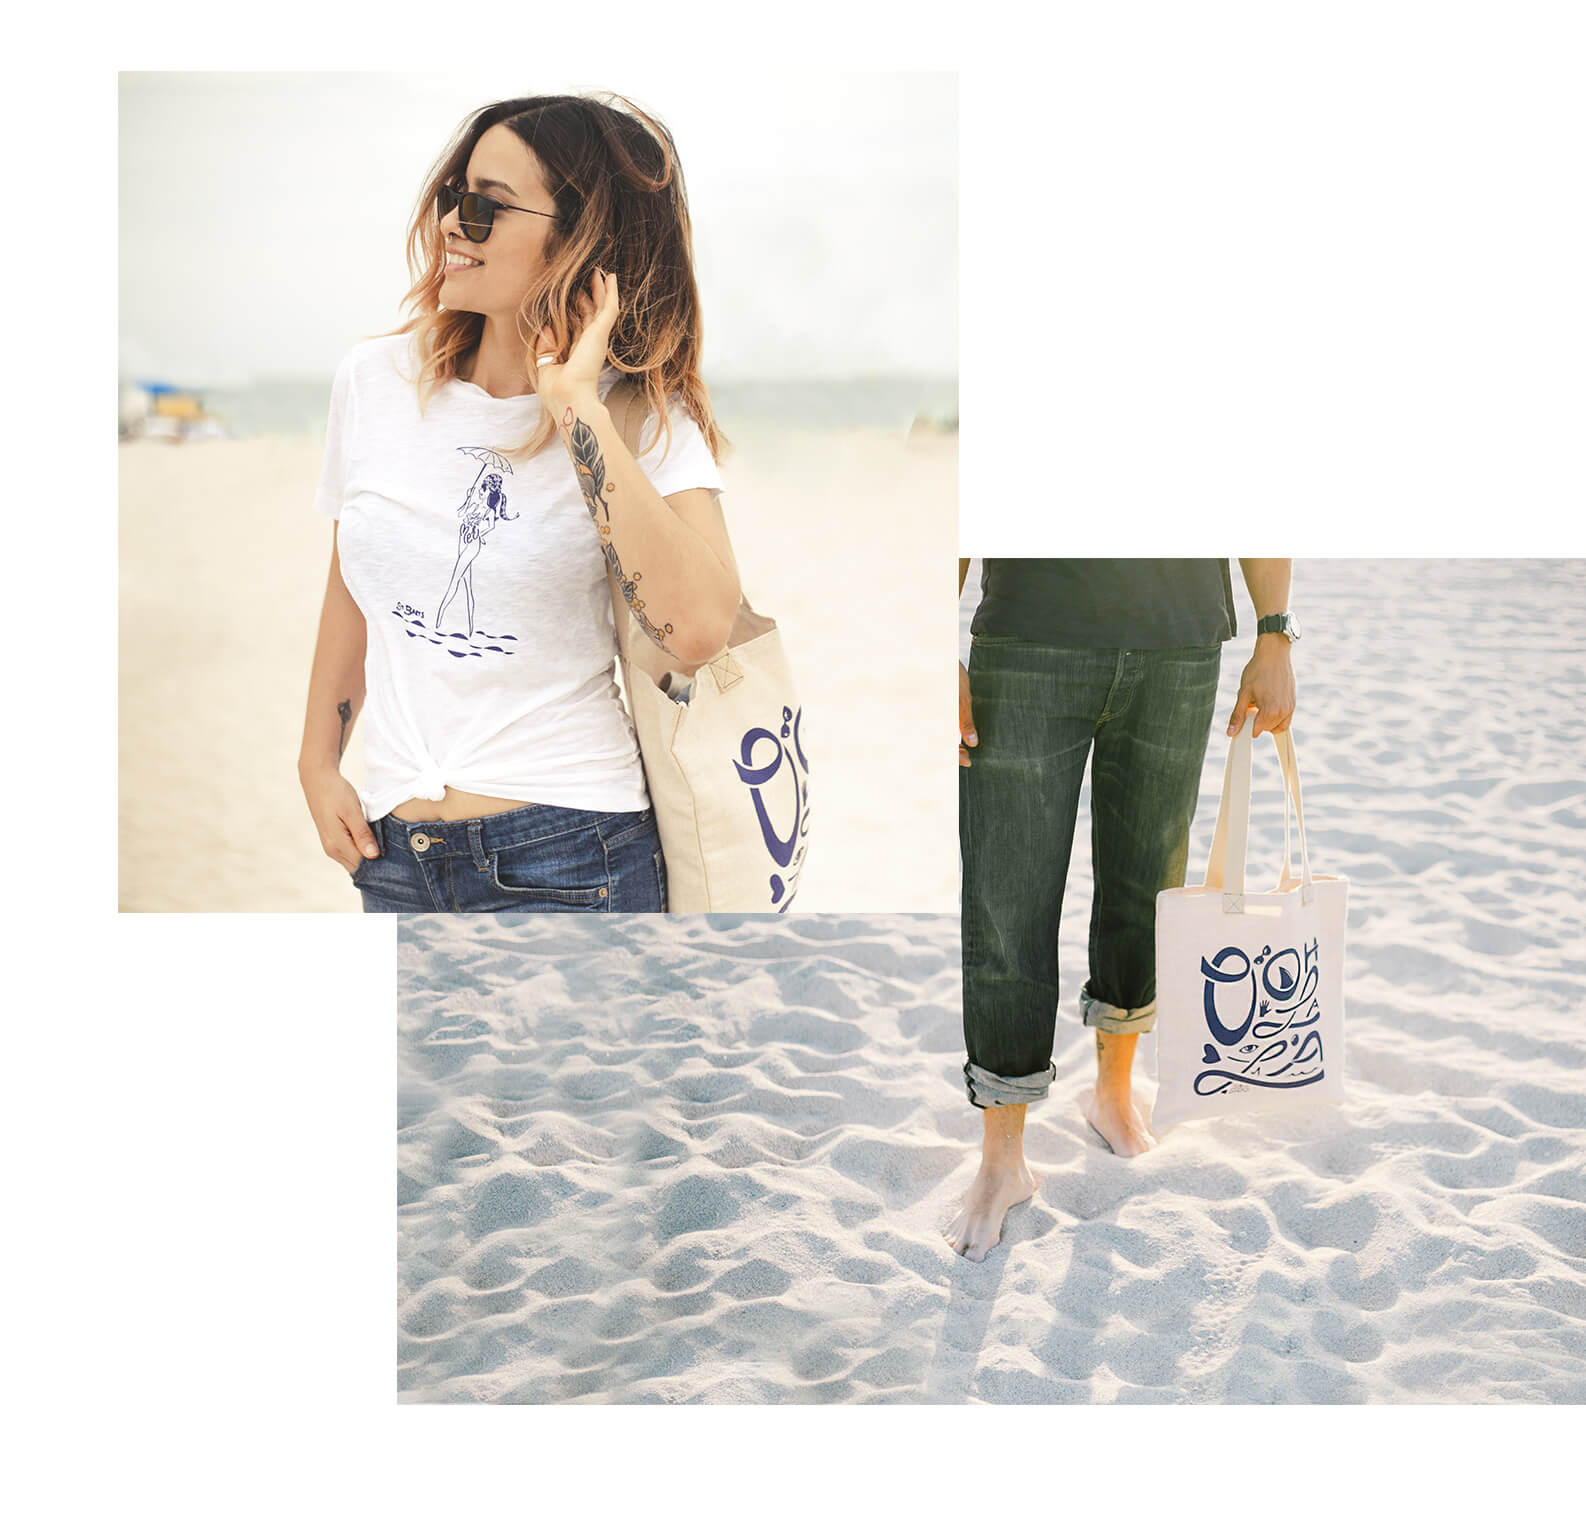 St Barths illustration on a tshirt  and tote by Jacober Creative